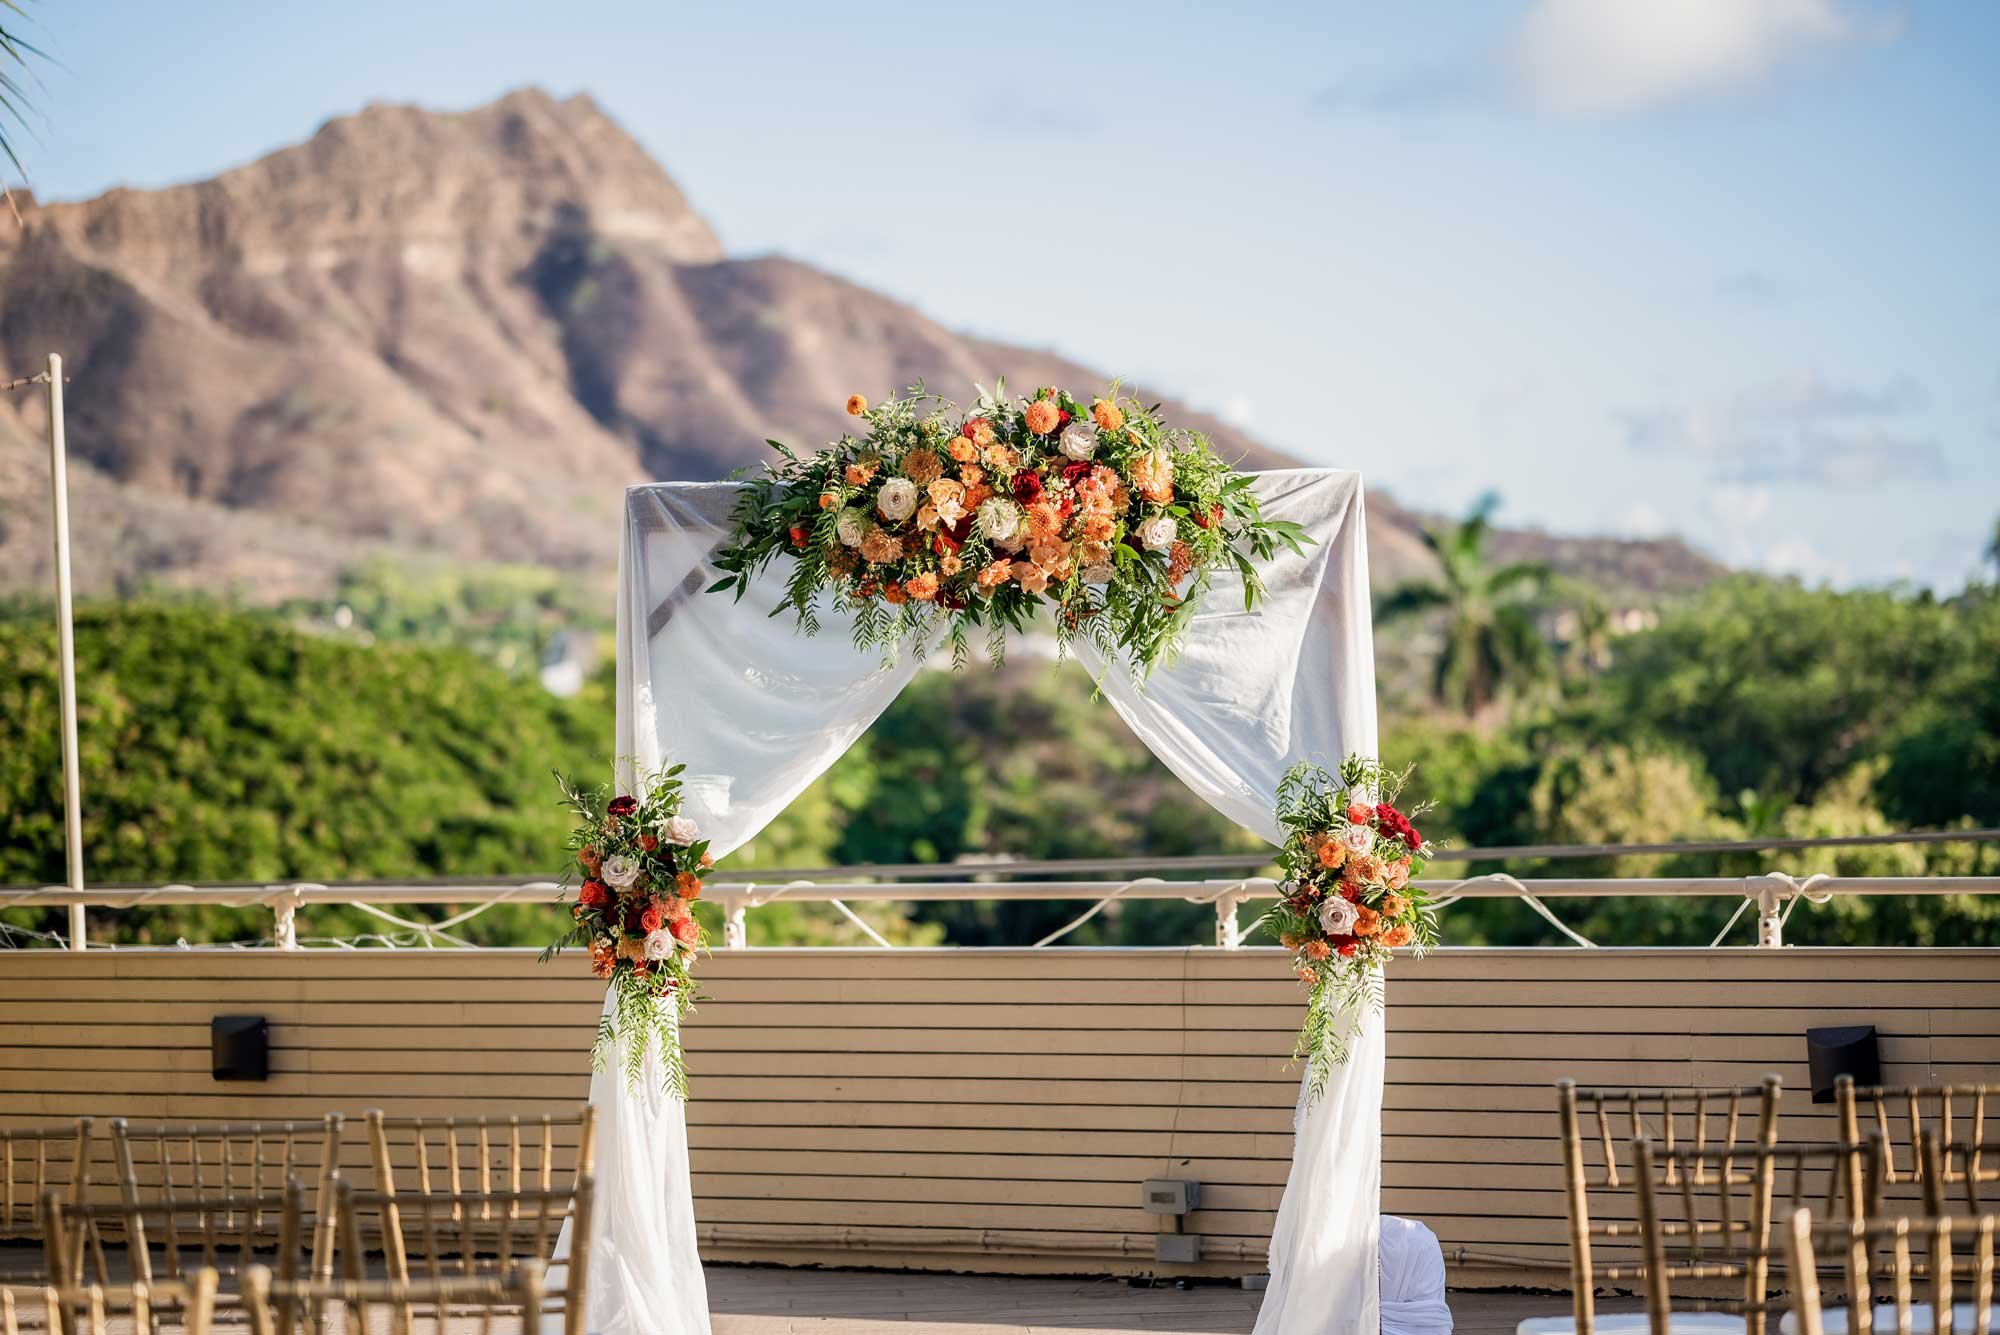 Wedding-Arch-With-Fall-Colored-Florals.jpg